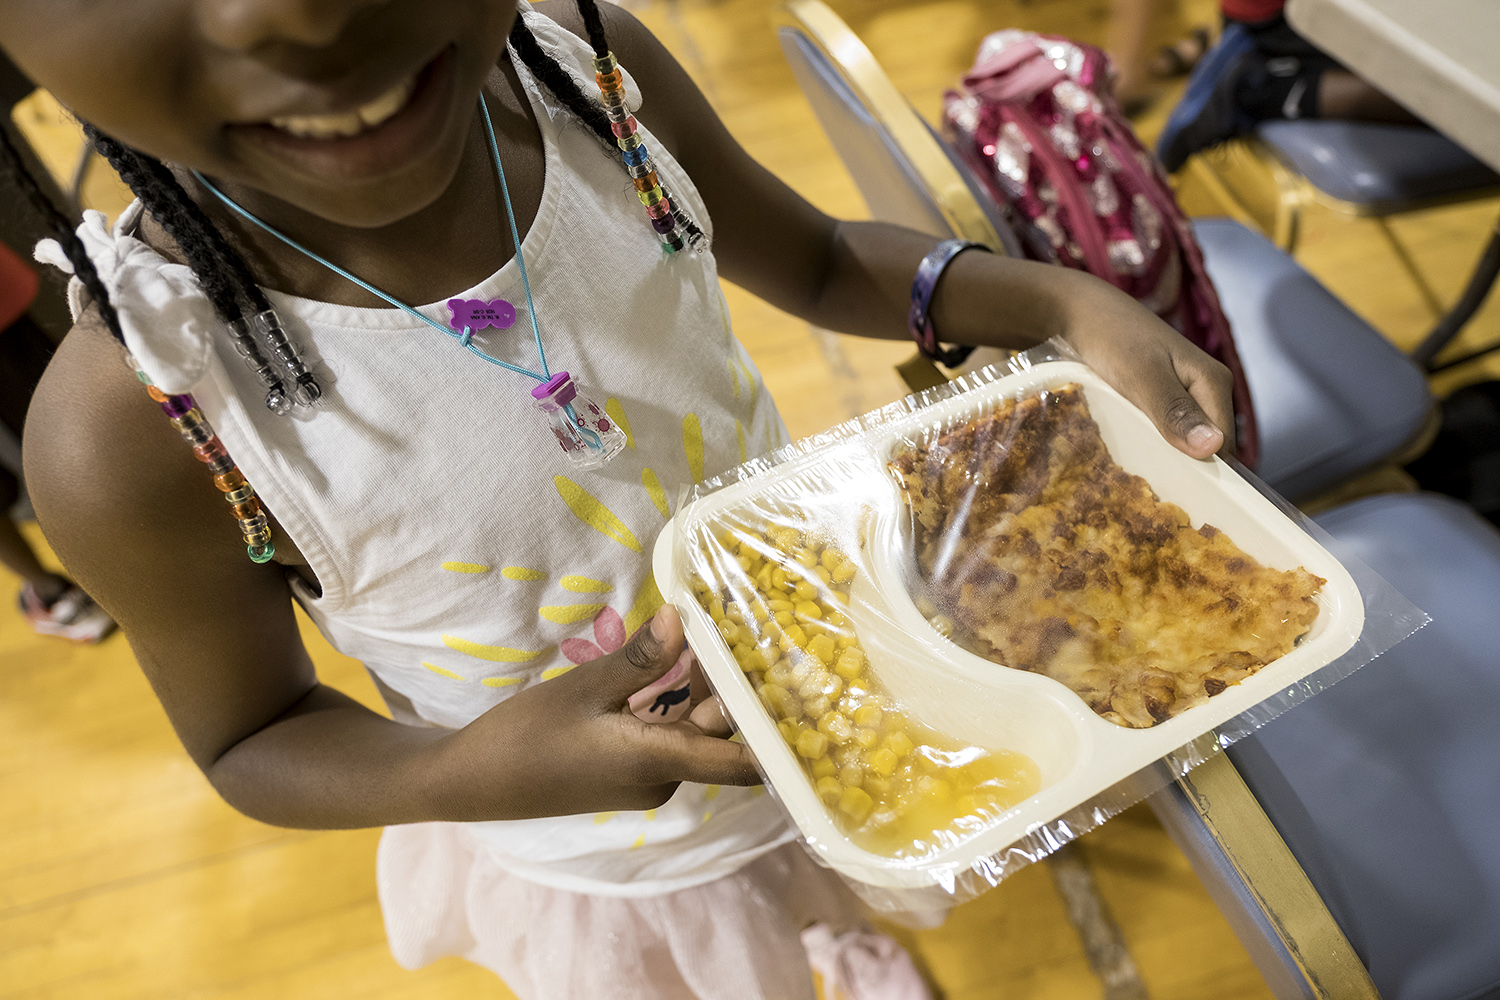 Jasmyn Spivey, 6, carries her lunch to the table at Jarvis Christian College in Hawkins, one of 77 sites the East Texas Food Bank sponsors to serve free food to hungry students.